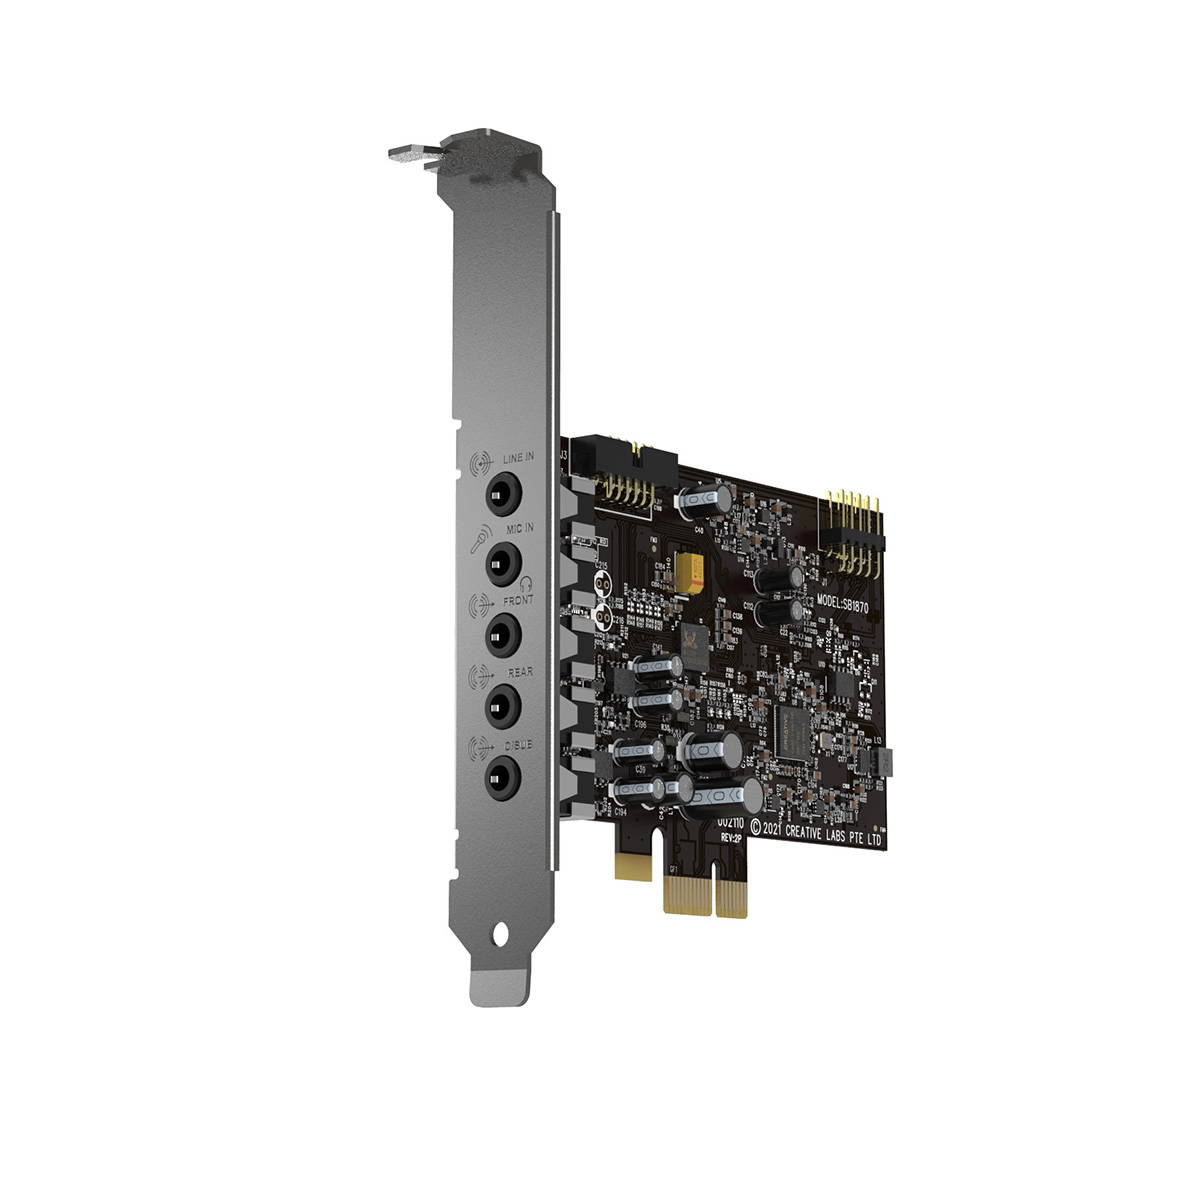 Creative - Creative Sound Blaster Audigy FX V2 Upgradable Hi-res 5.1 PCI-e Sound Card with SmartComms Kit